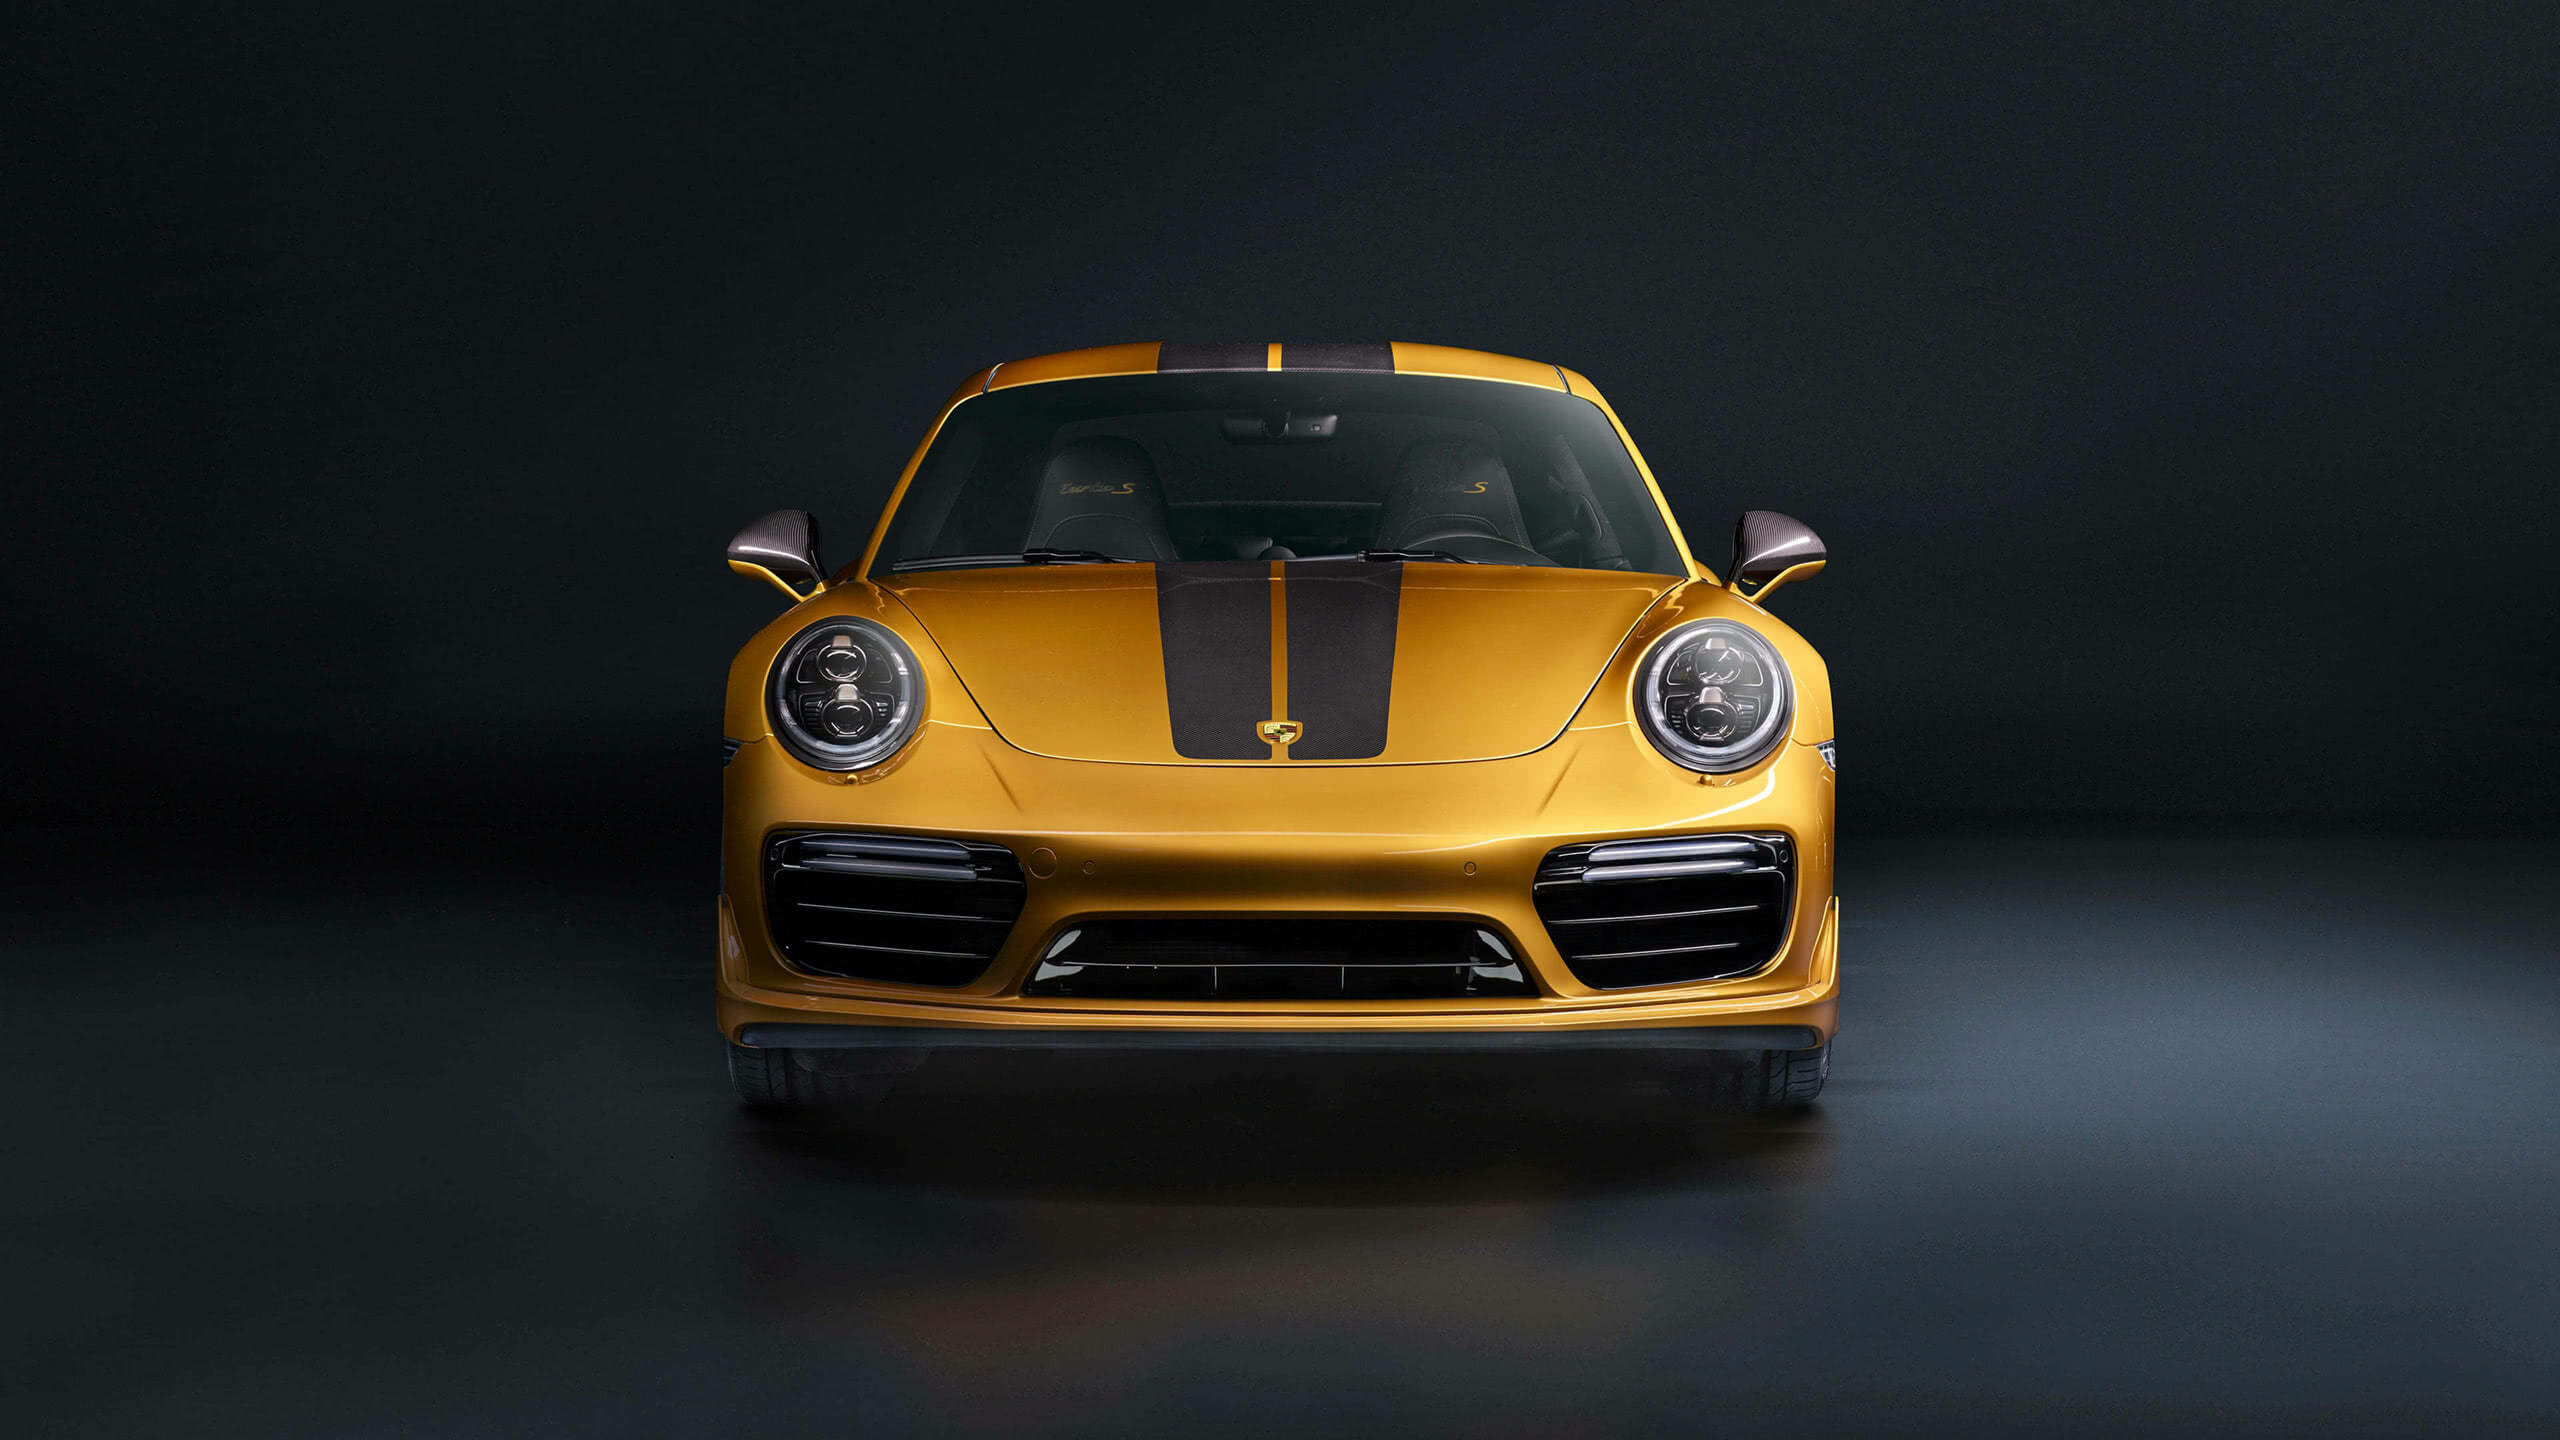 Porsche: Turbo S Exclusive, The most powerful and unique 911 Turbo S ever. 2560x1440 HD Wallpaper.